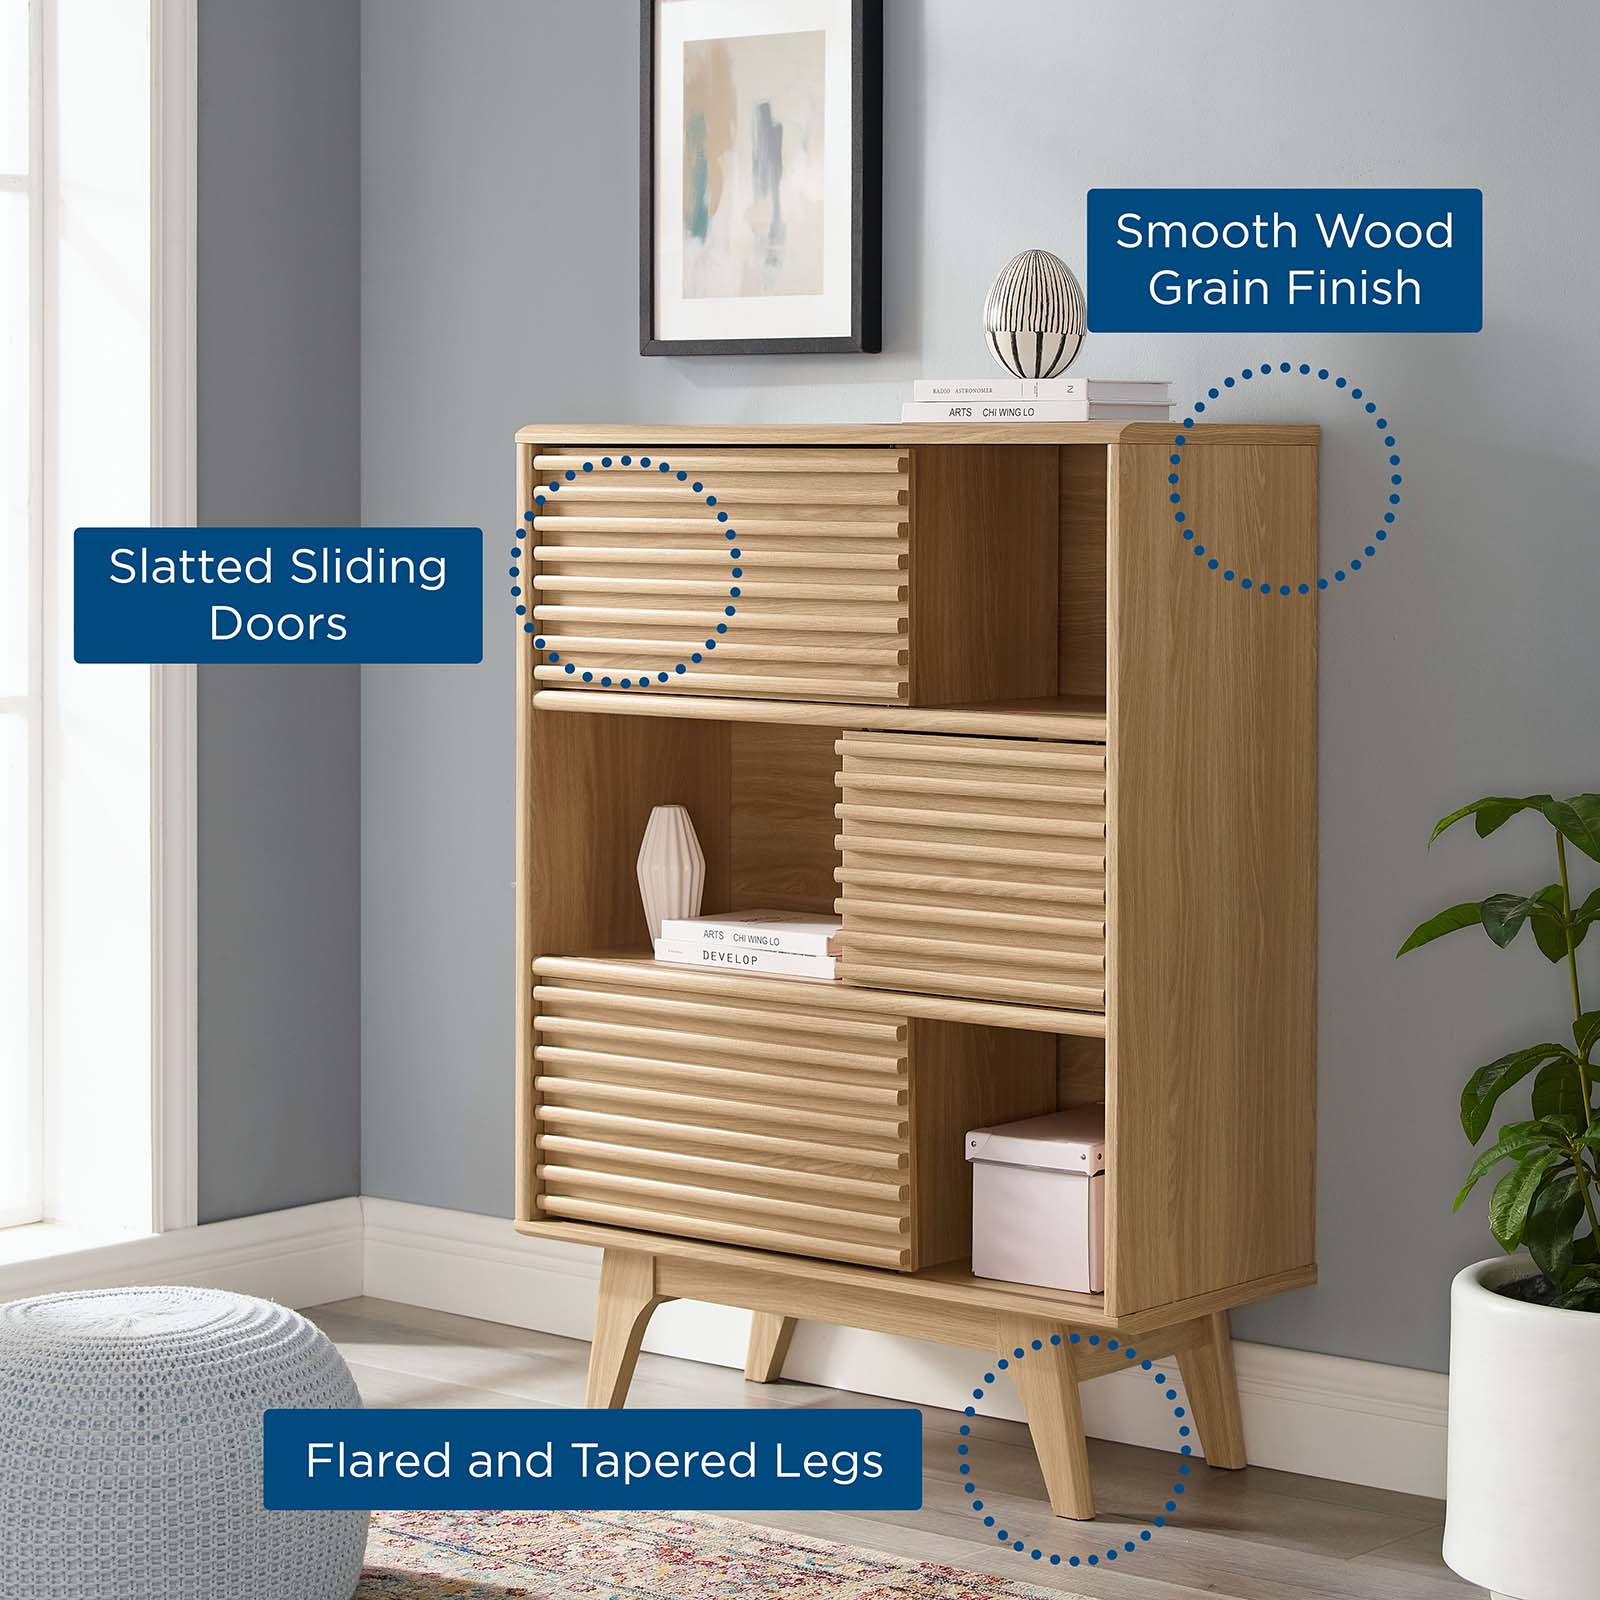 Modway Bookcases & Display Units - Render-Three-Tier-Display-Storage-Cabinet-Stand-Oak